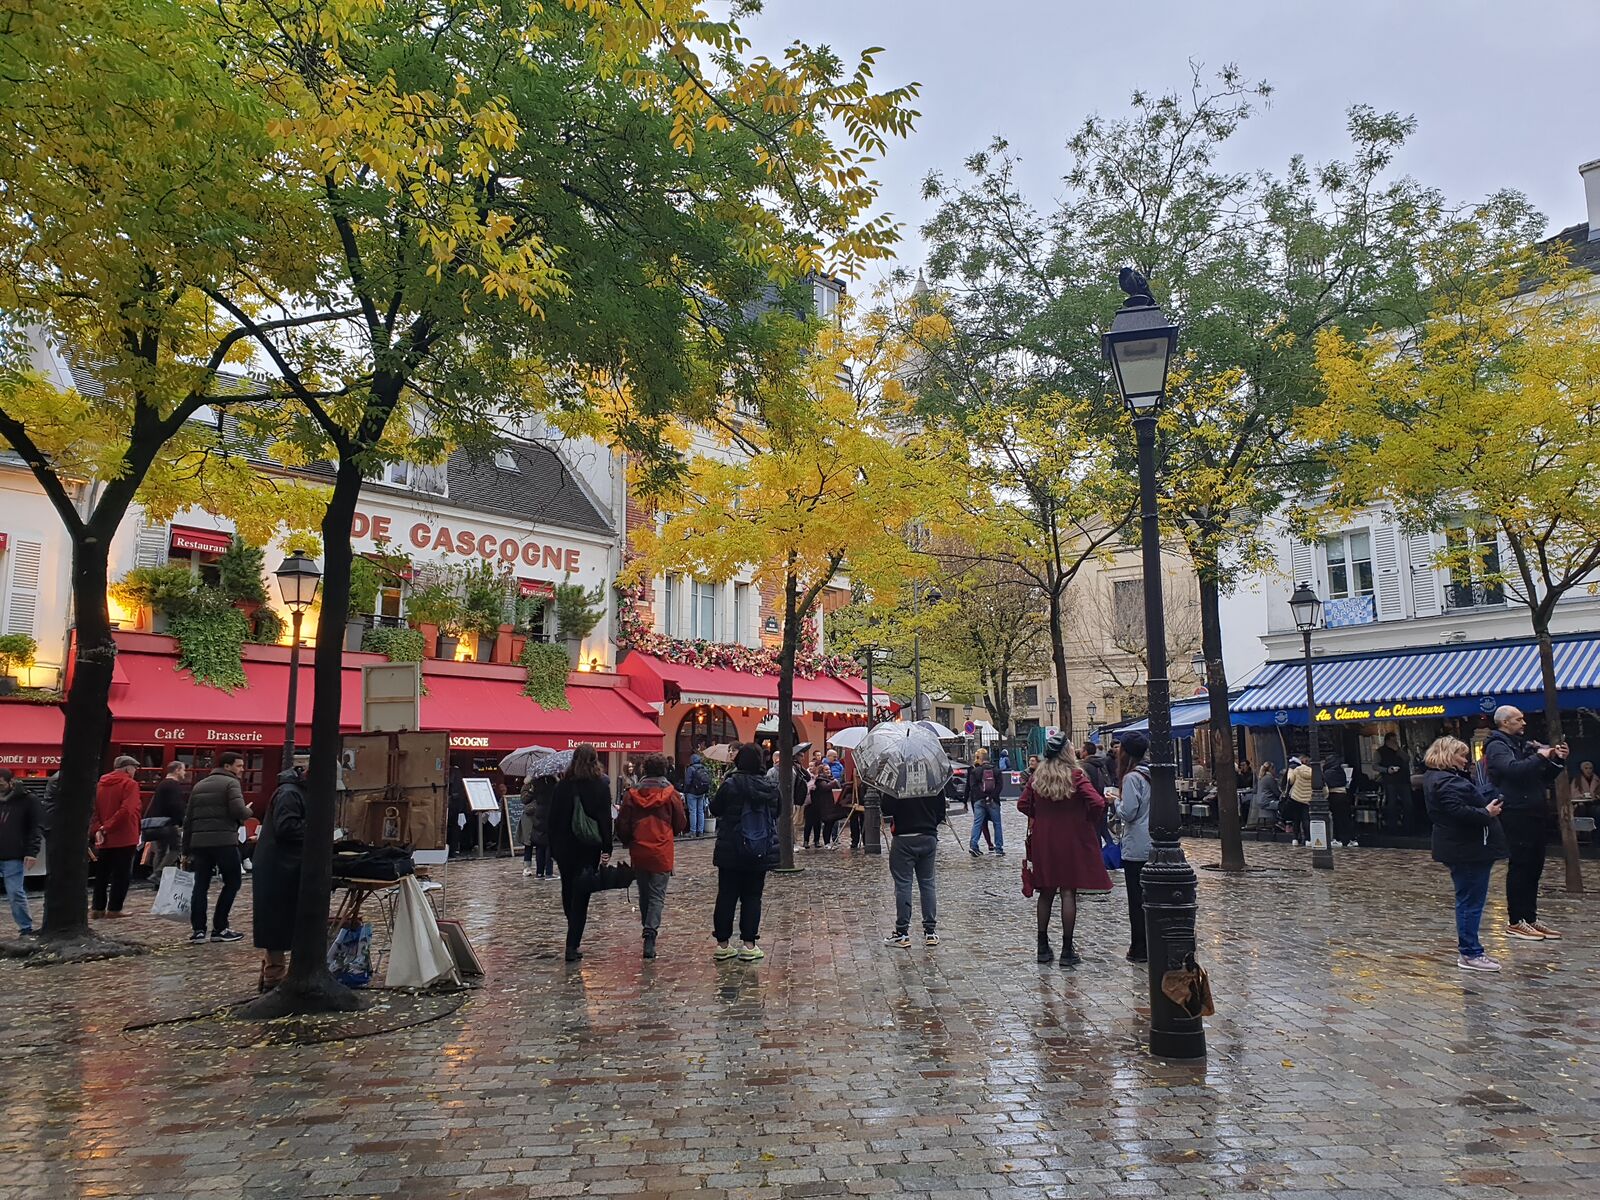 In Paris, I was able to get used to the rainy autumn again.